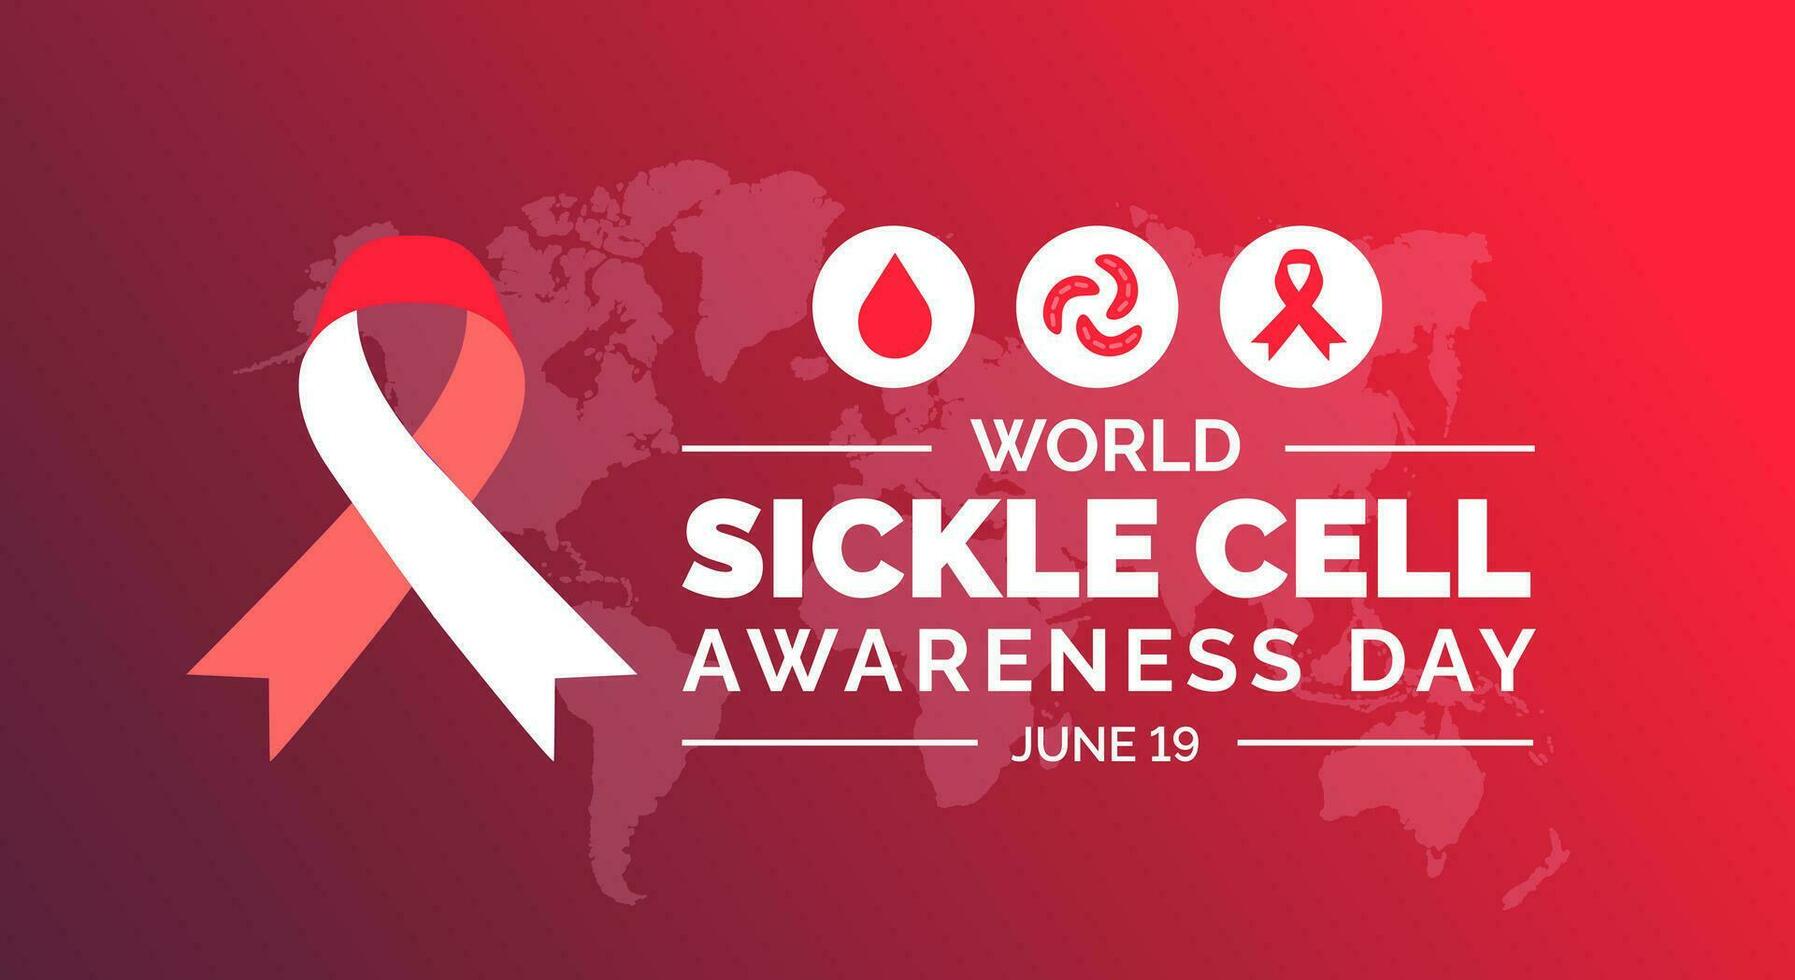 World Sickle Cell Awareness Day background or banner design template. vector